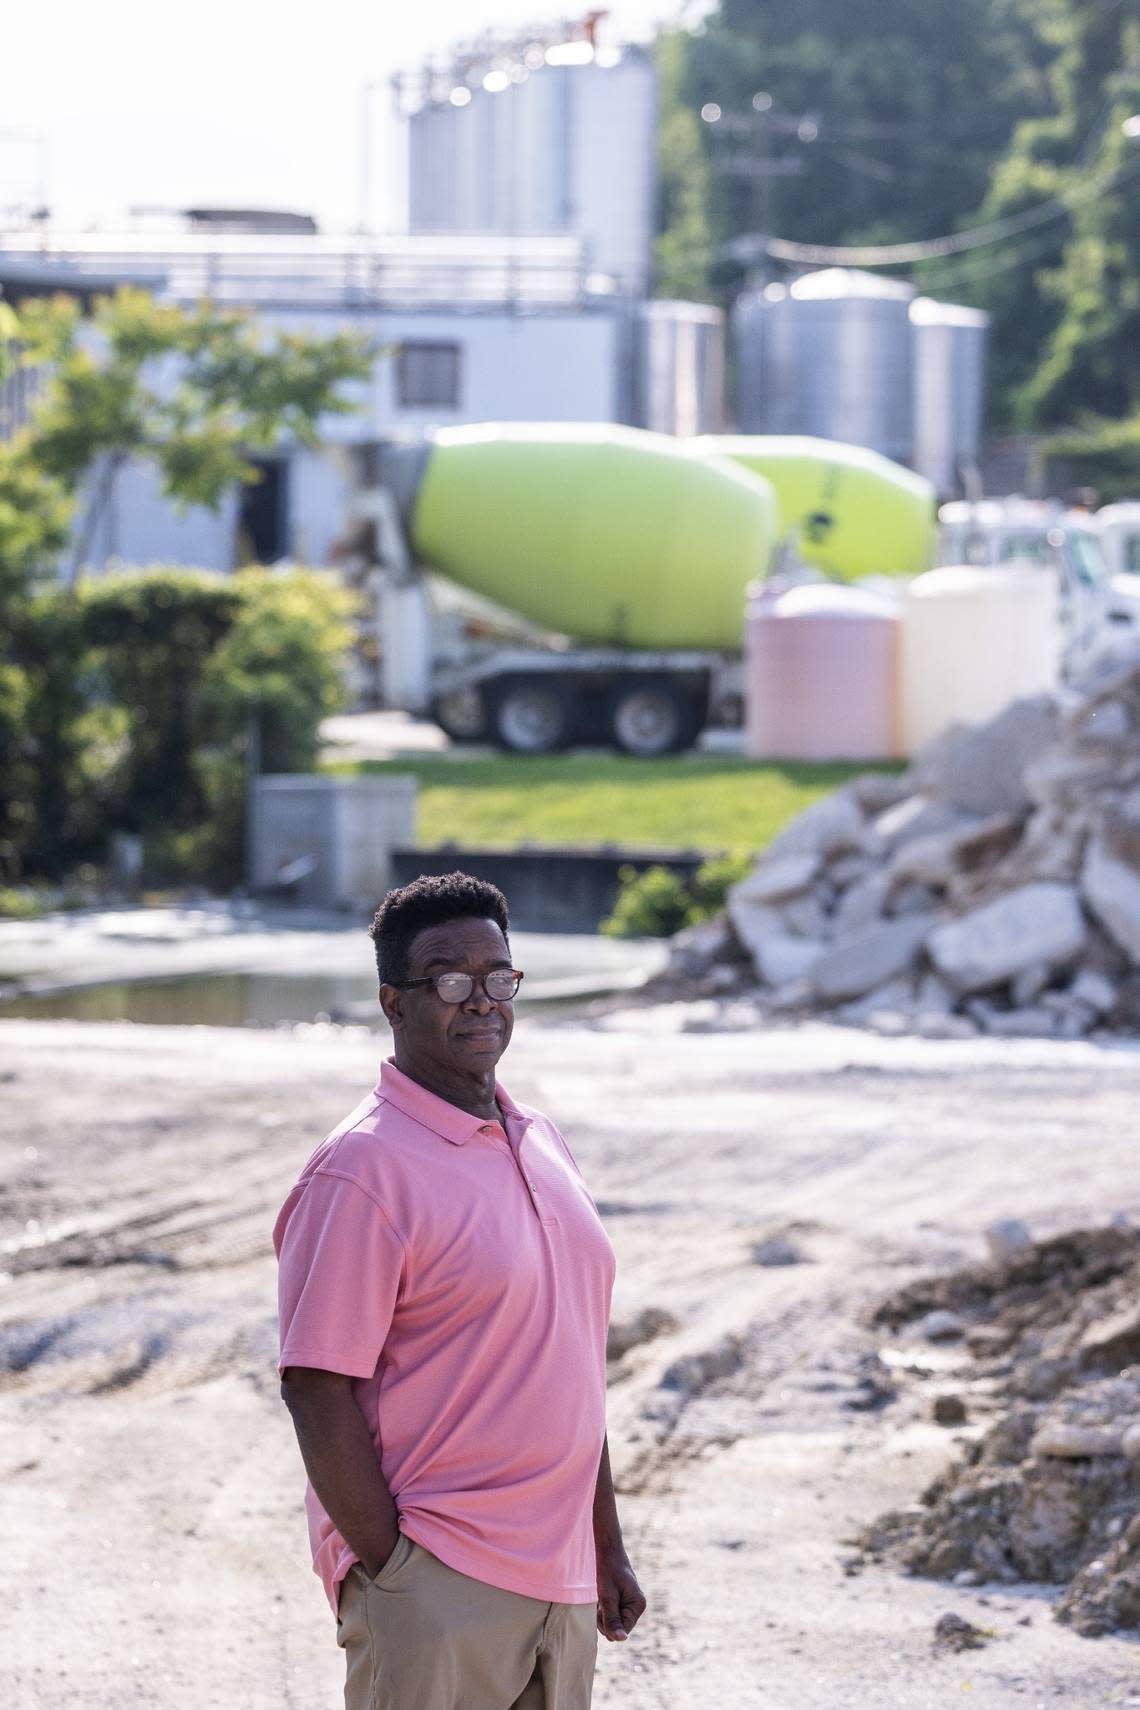 Tony Collins, the former president of the Southside Neighborhood Association in High Point, doesn’t oppose having job-supplying factories nearby. But he also wants to know if they have any negative impacts on the surrounding residential areas.